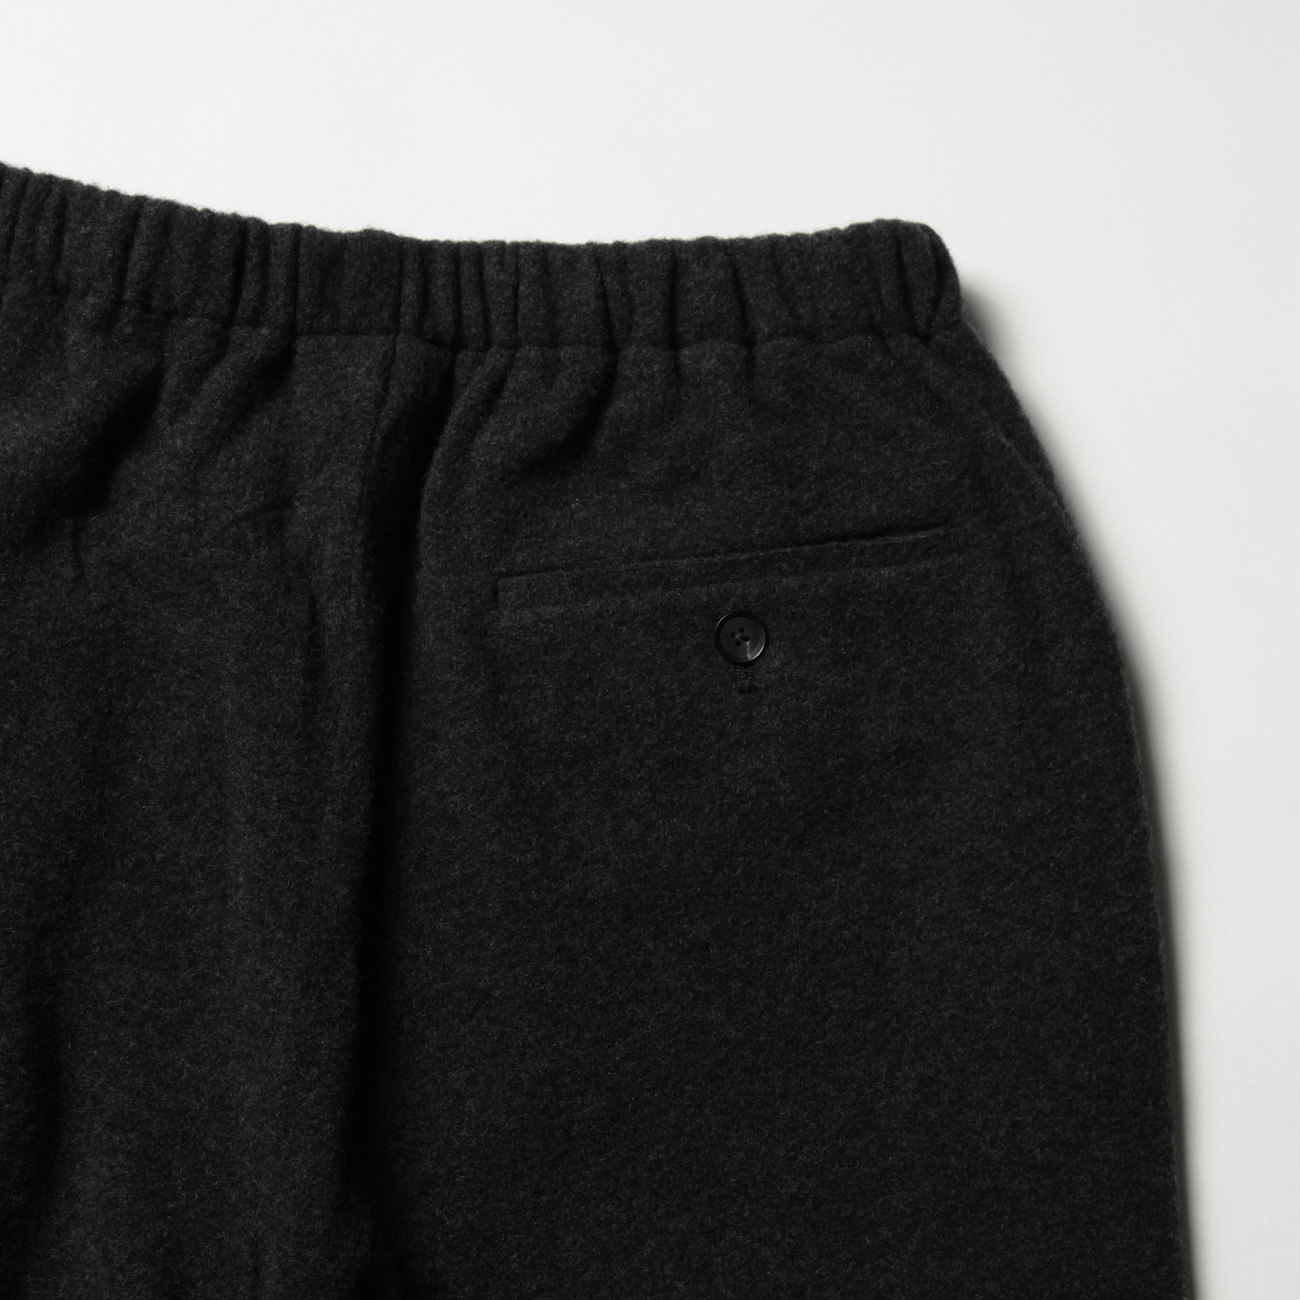 AURALEE / オーラリー | CASHMERE WOOL BRUSHED JERSEY PANTS (メンズ ...